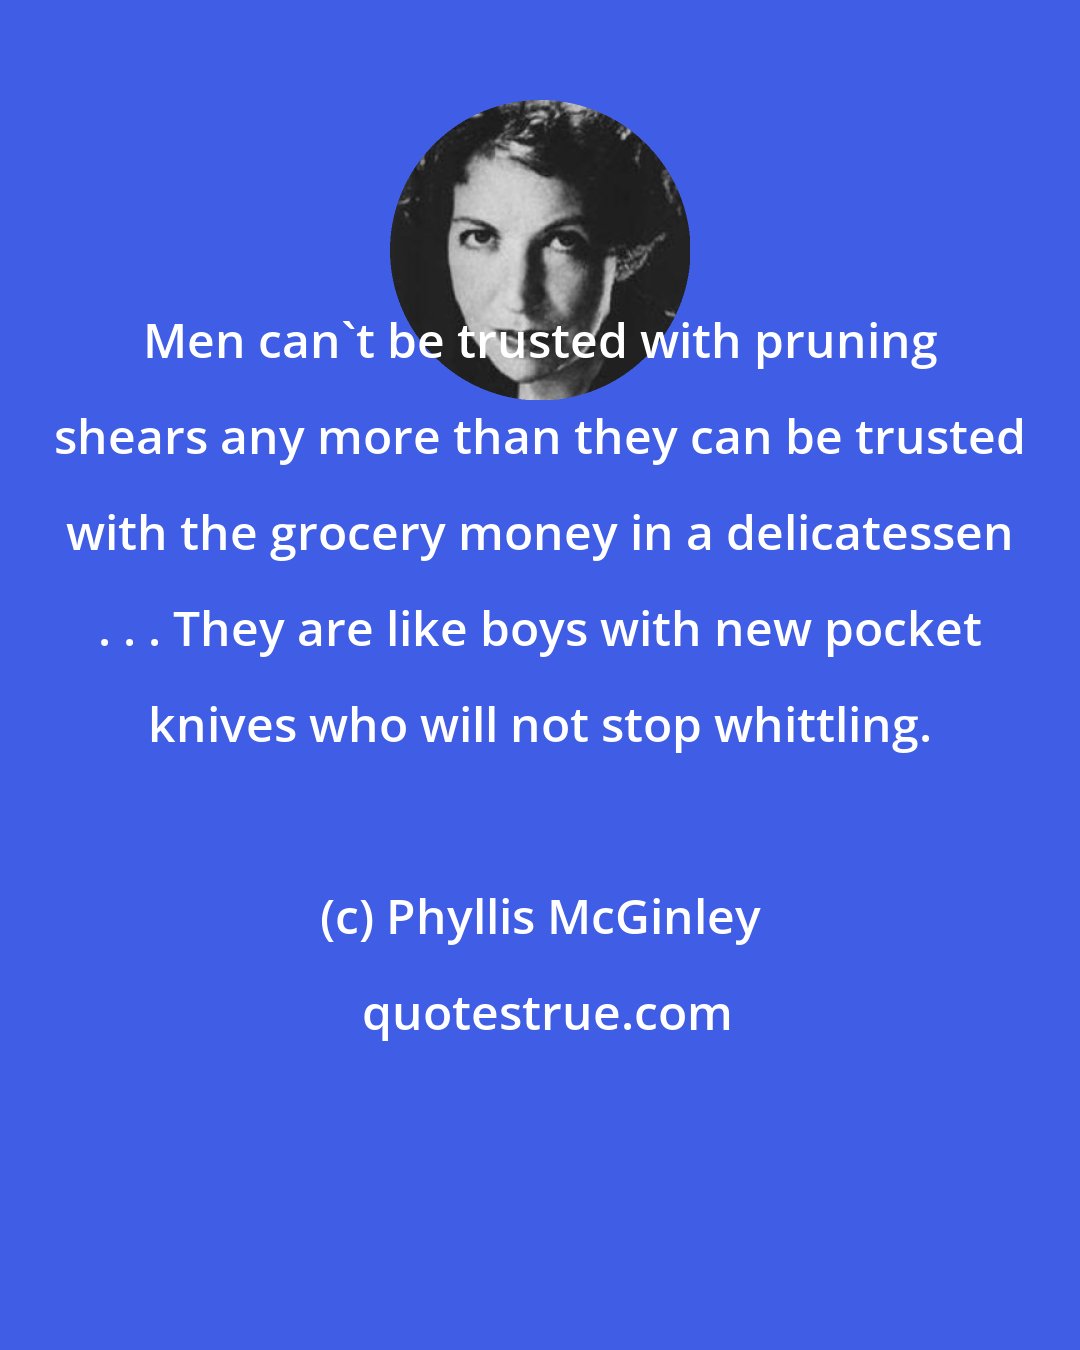 Phyllis McGinley: Men can't be trusted with pruning shears any more than they can be trusted with the grocery money in a delicatessen . . . They are like boys with new pocket knives who will not stop whittling.